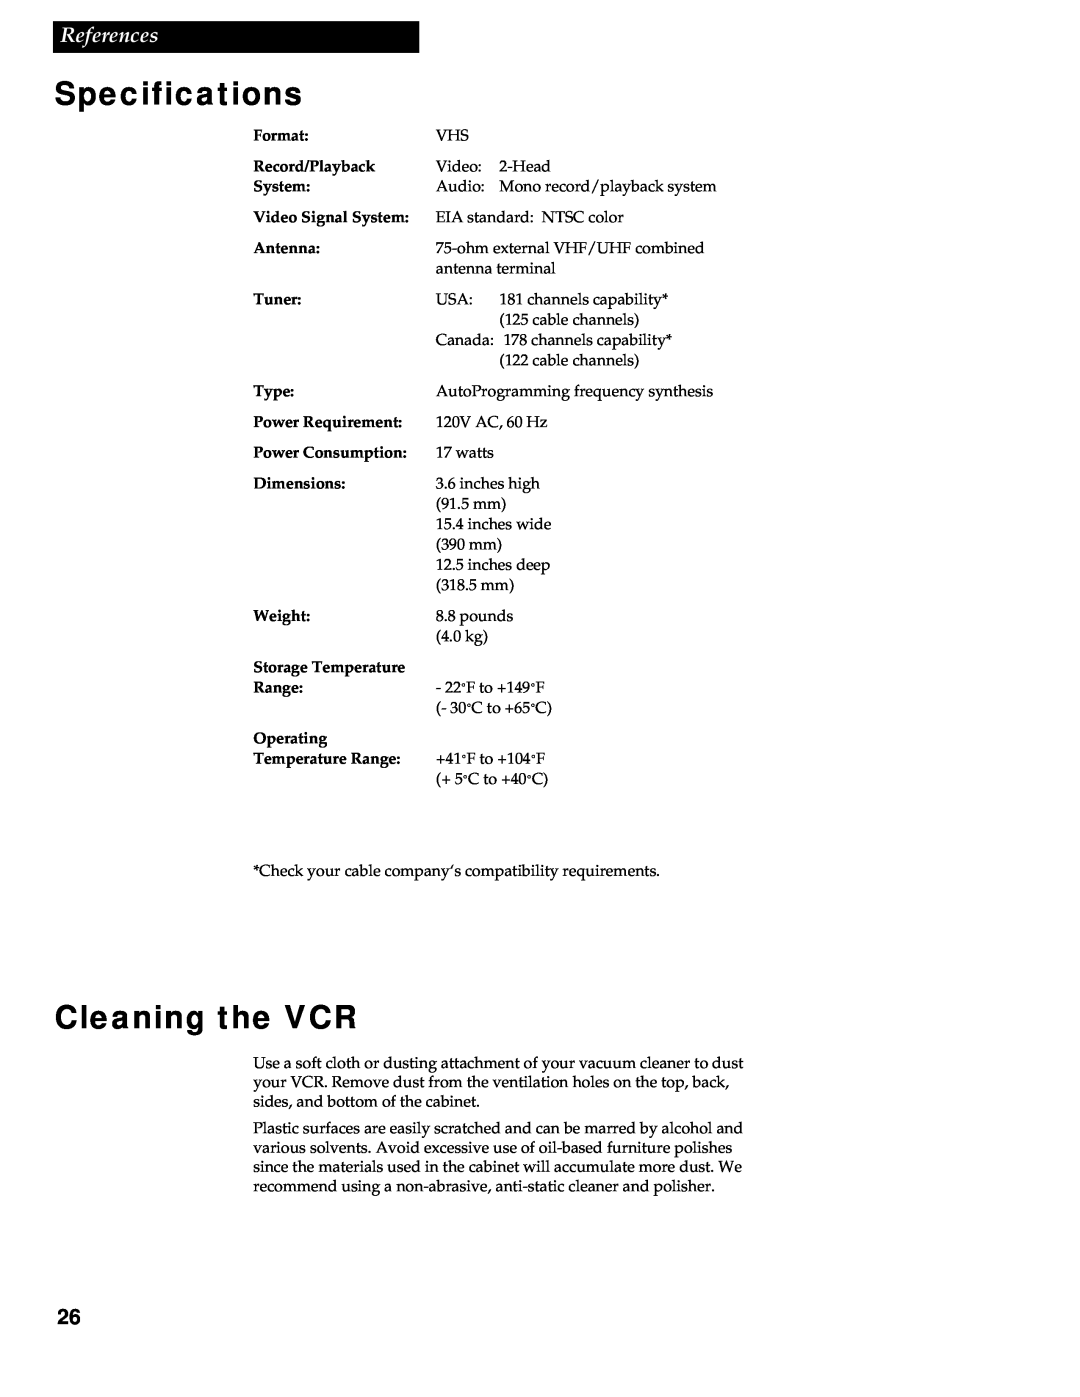 RCA VR336 Specifications, Cleaning the VCR, References, Format, Record/Playback, Video Signal System, Antenna, Tuner 